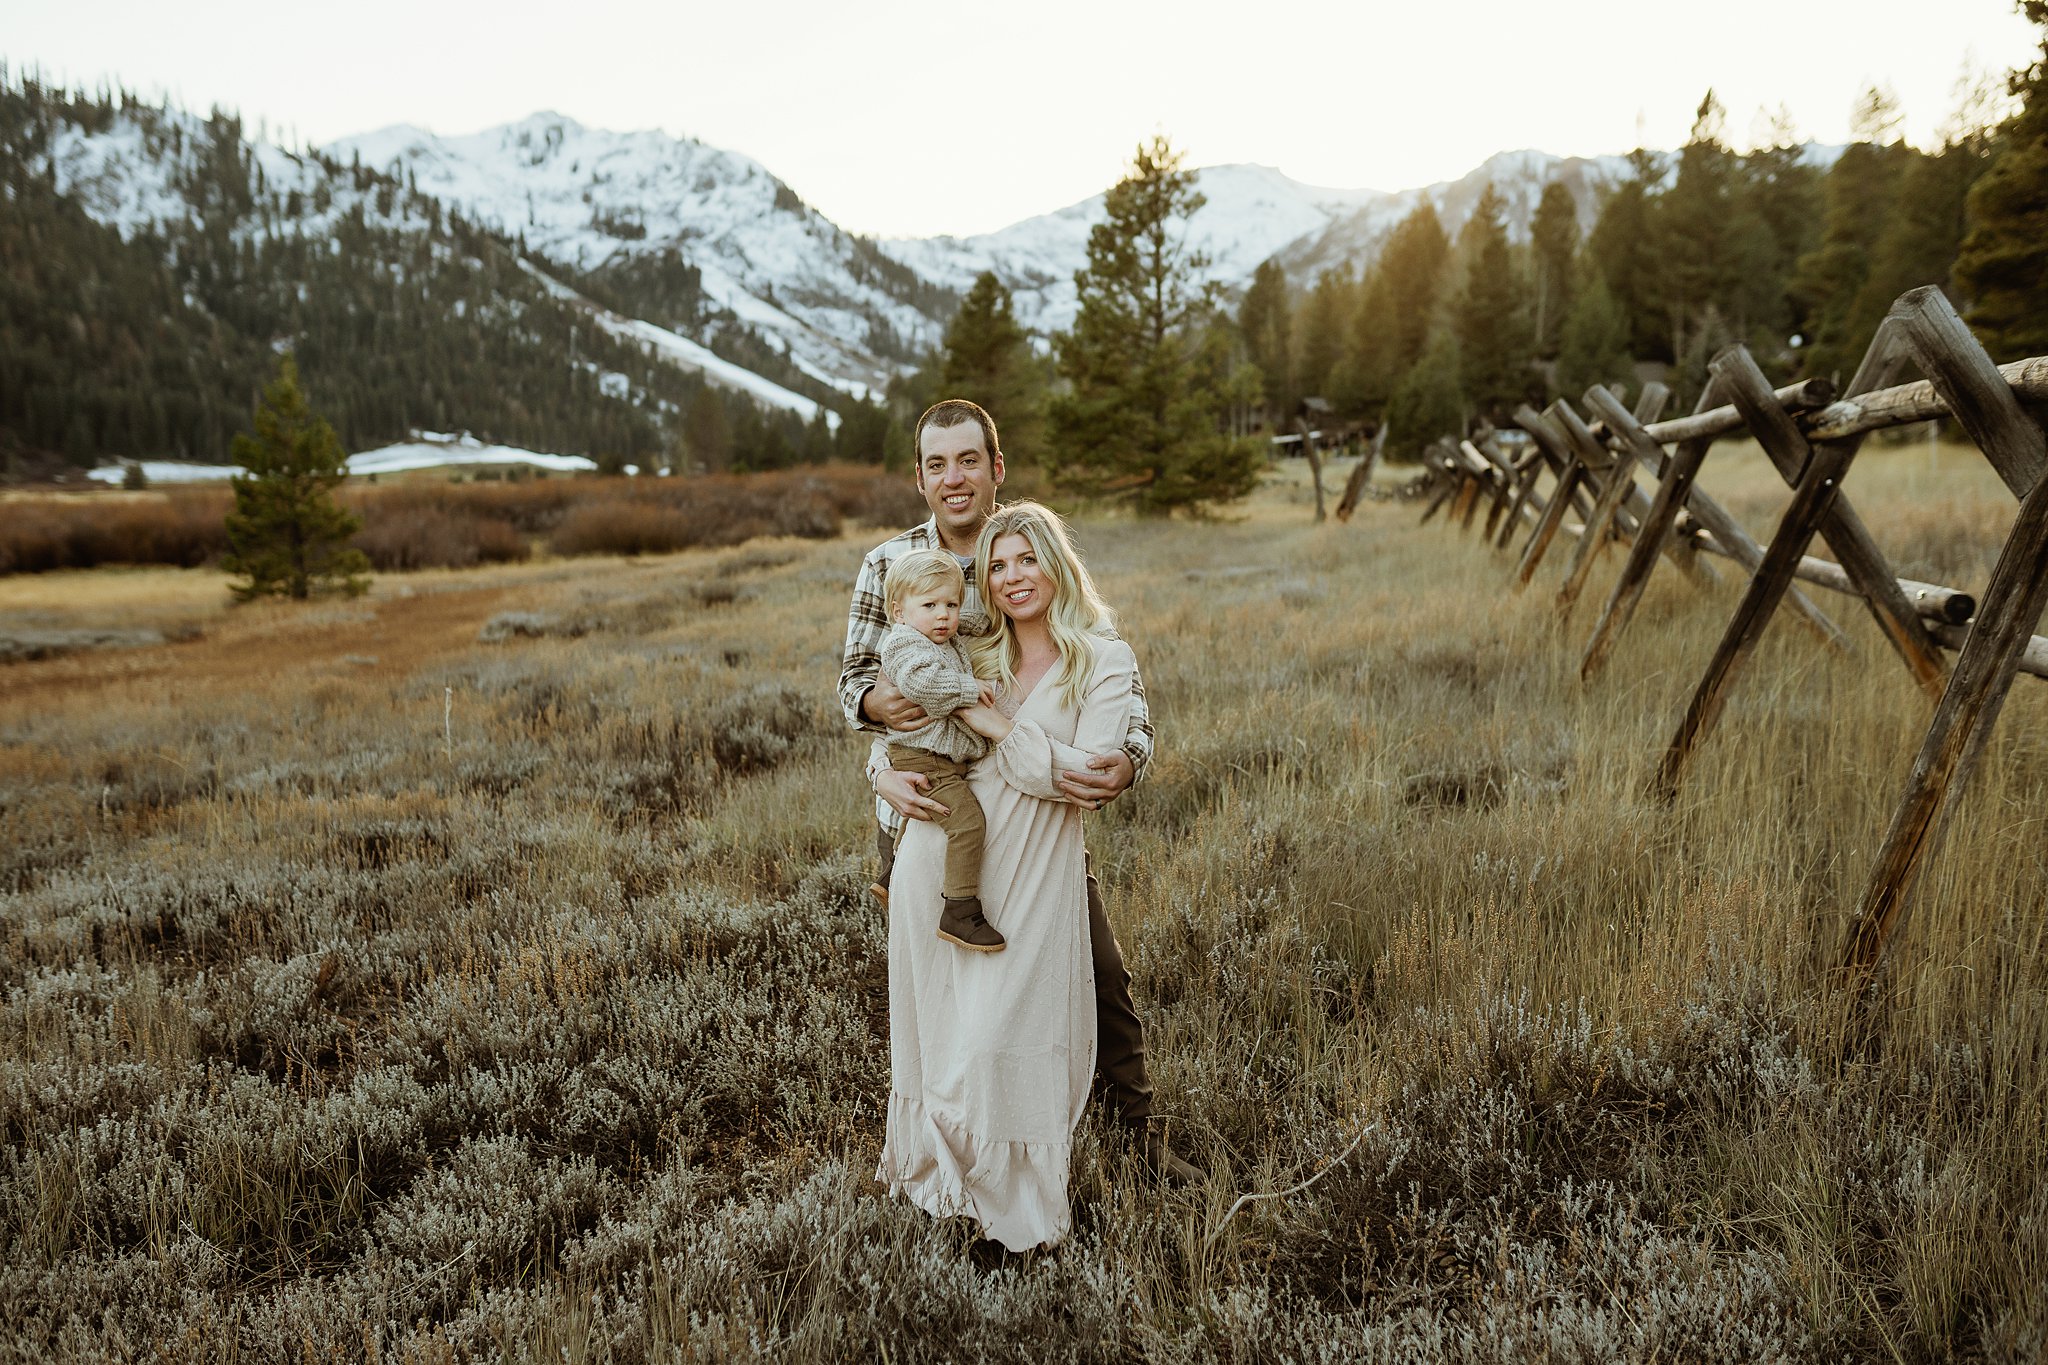 A mom and dad stand in a pasture by a wooden fence holding their toddler son at sunset during a stay at a family friendly hotels lake tahoe